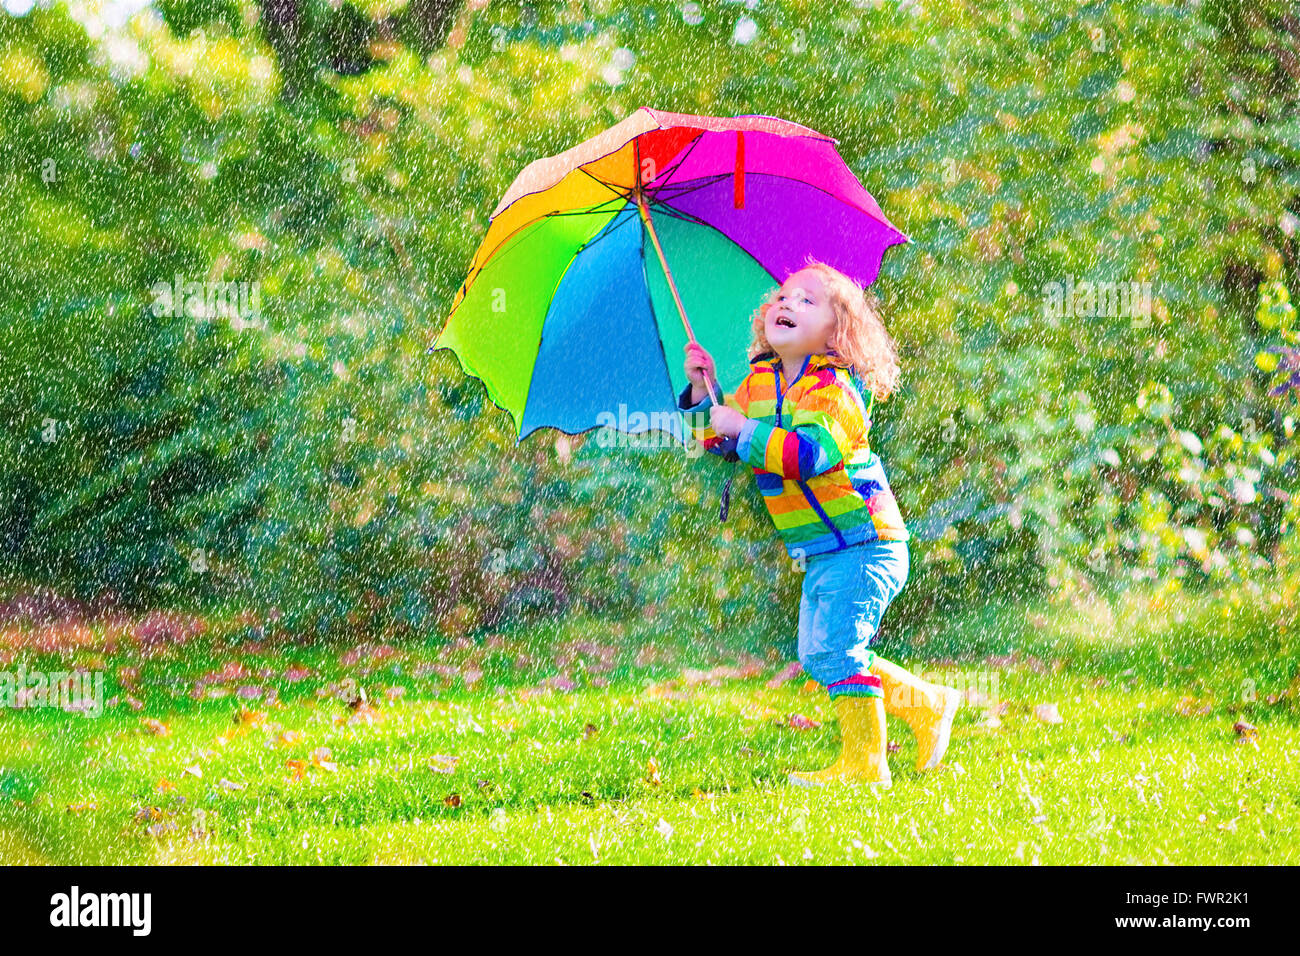 Funny cute curly toddler girl wearing yellow waterproof coat and boots holding colorful umbrella playing in the garden Stock Photo